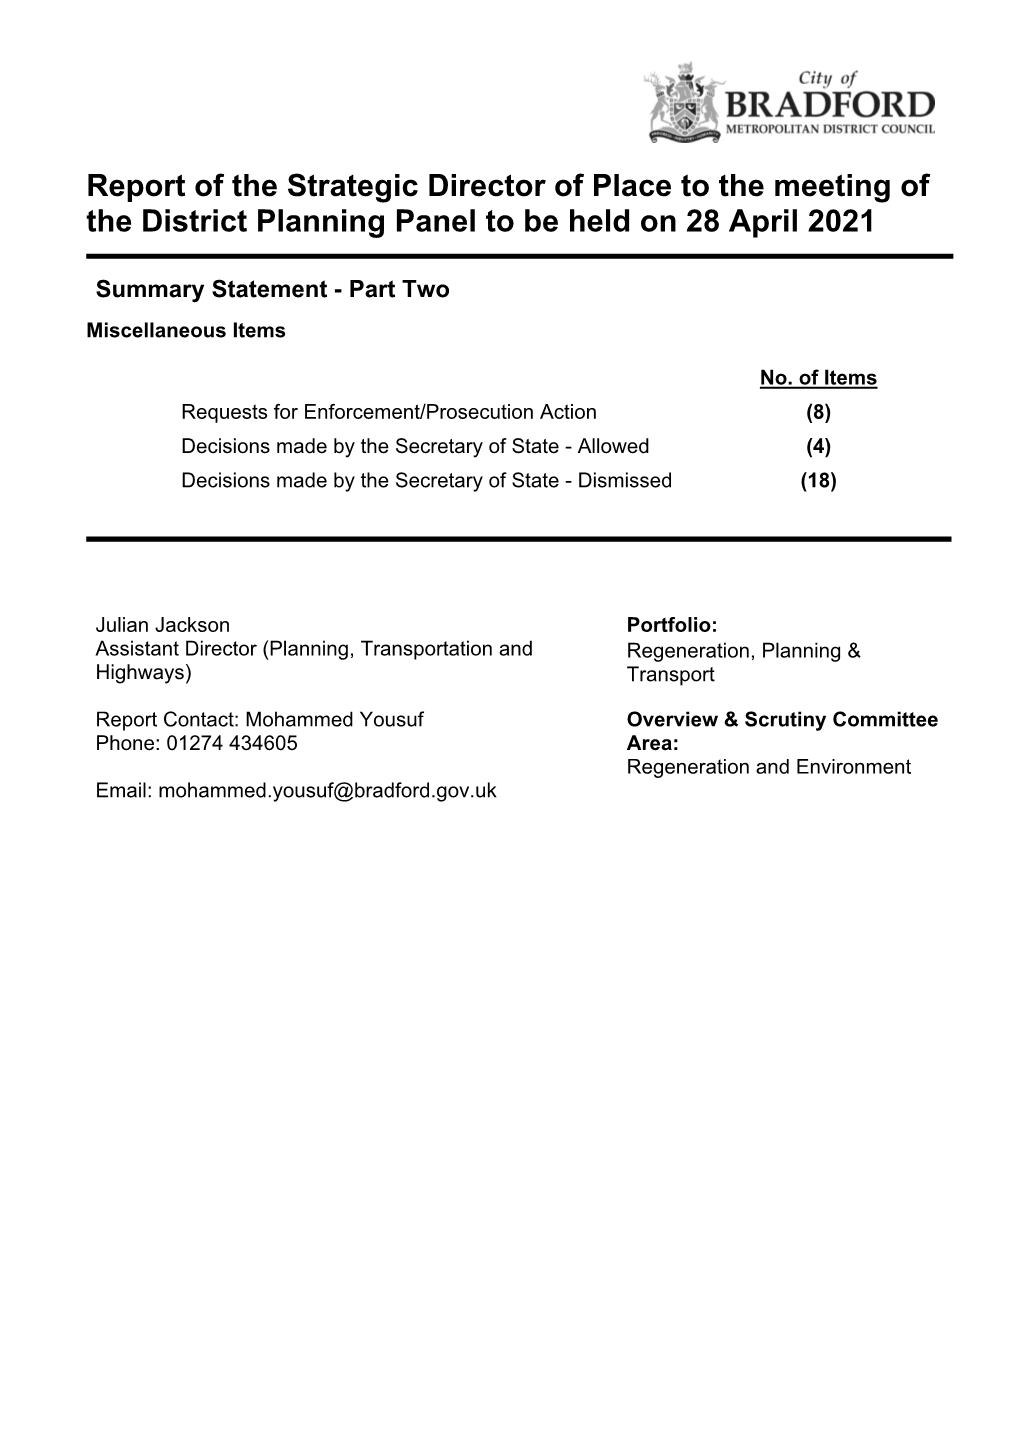 Report of the Strategic Director of Place to the Meeting of the District Planning Panel to Be Held on 28 April 2021